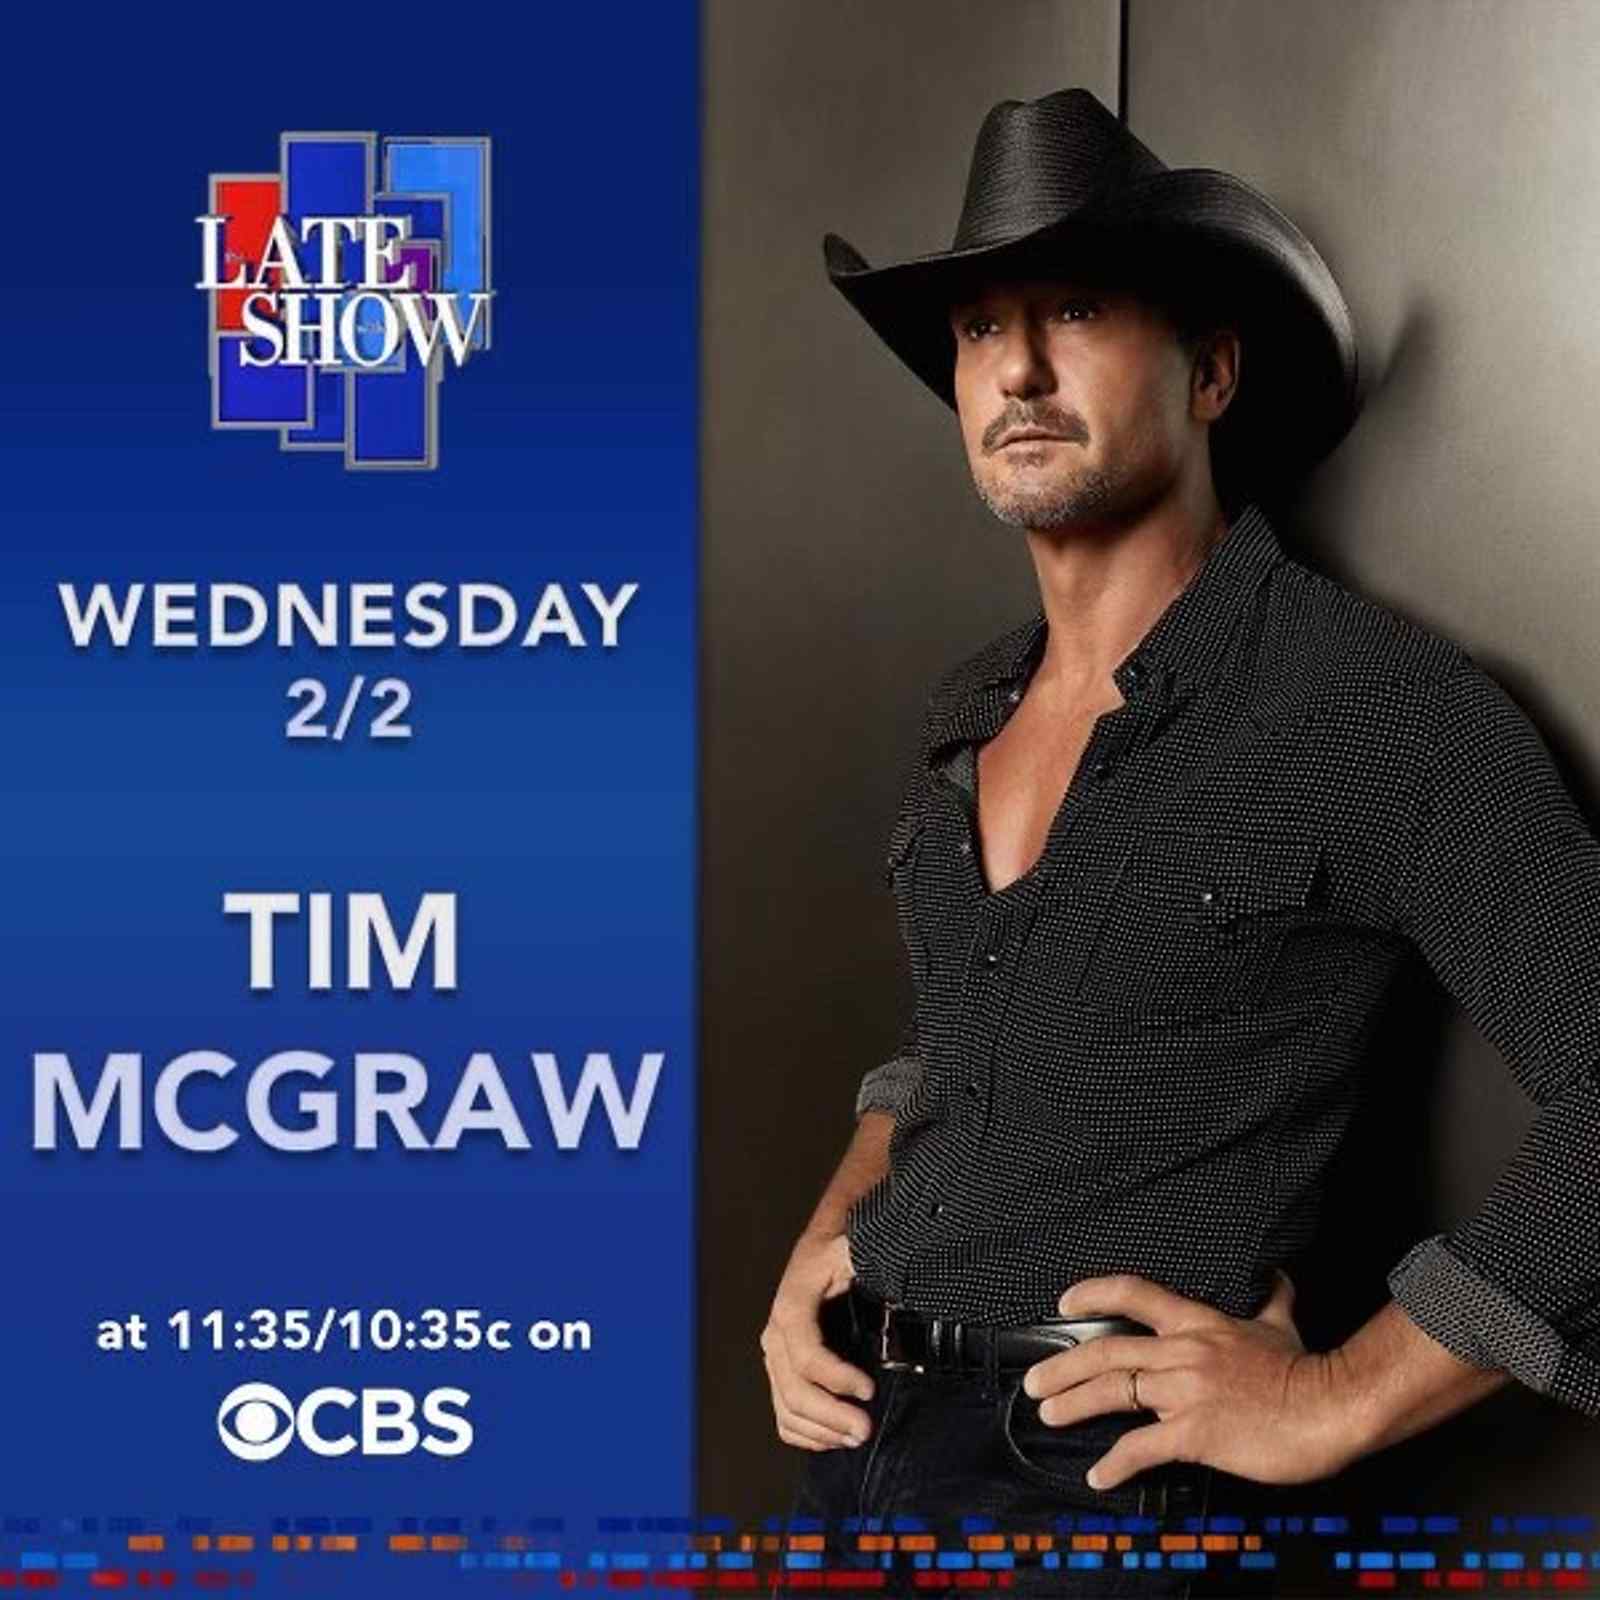 The Late Show with Stephen Colbert: Tim McGraw